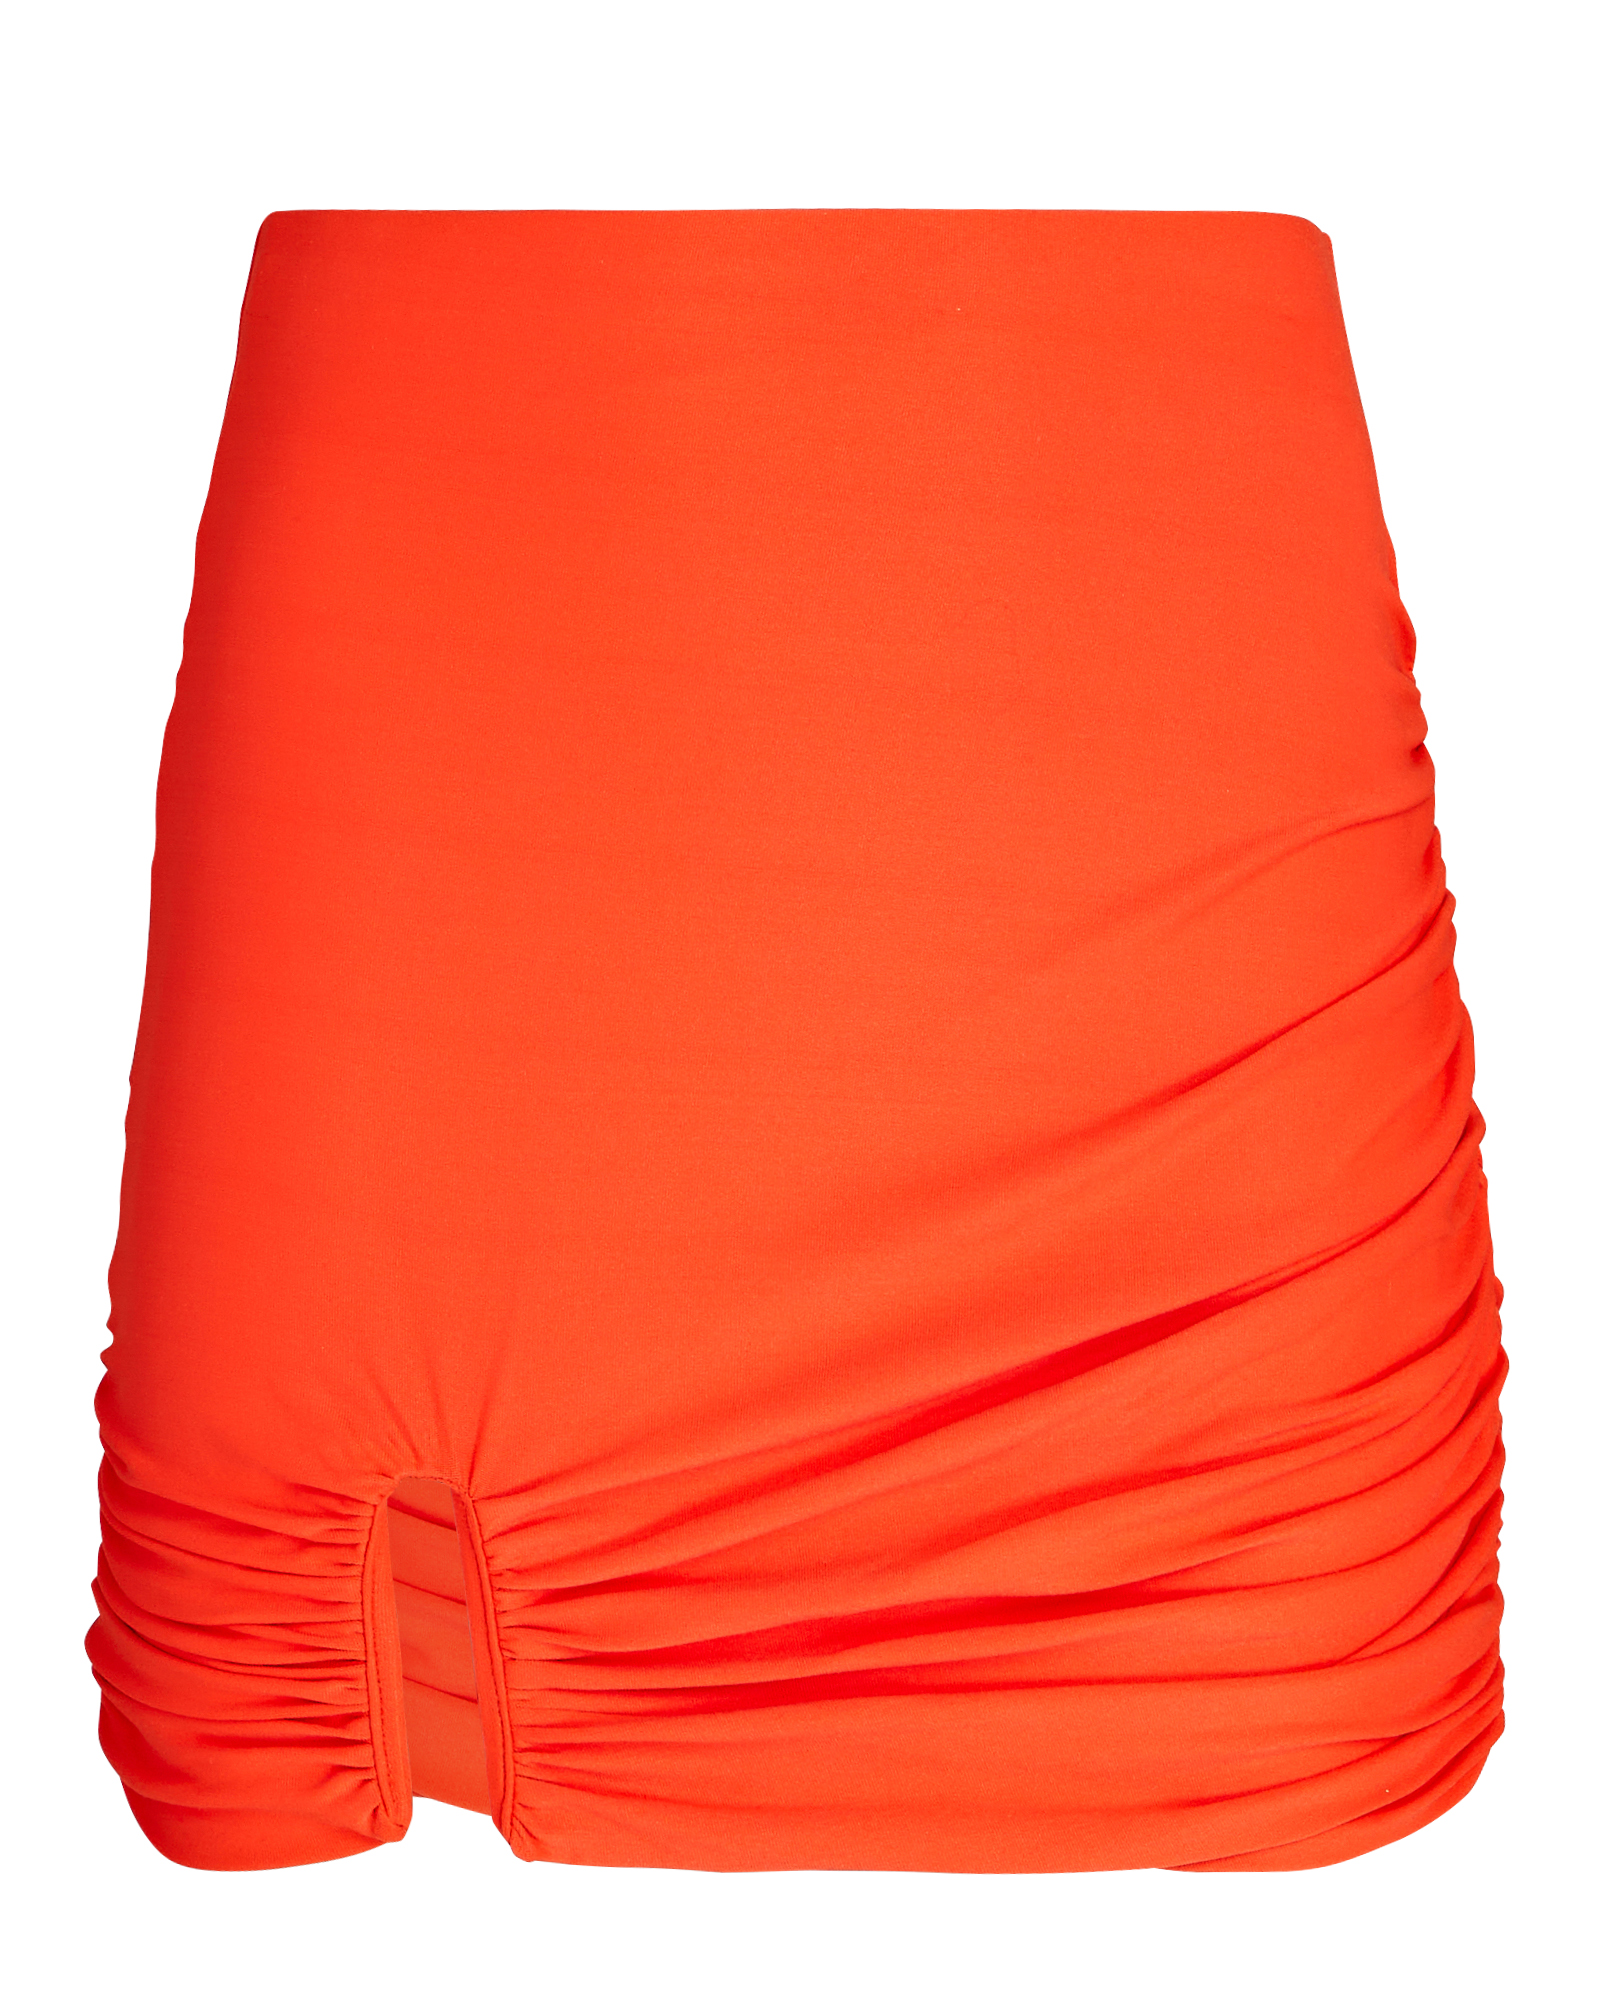 ALIX NYC Hannah Ruched Stretch-Jersey Mini Skirt in orange | INTERMIX®